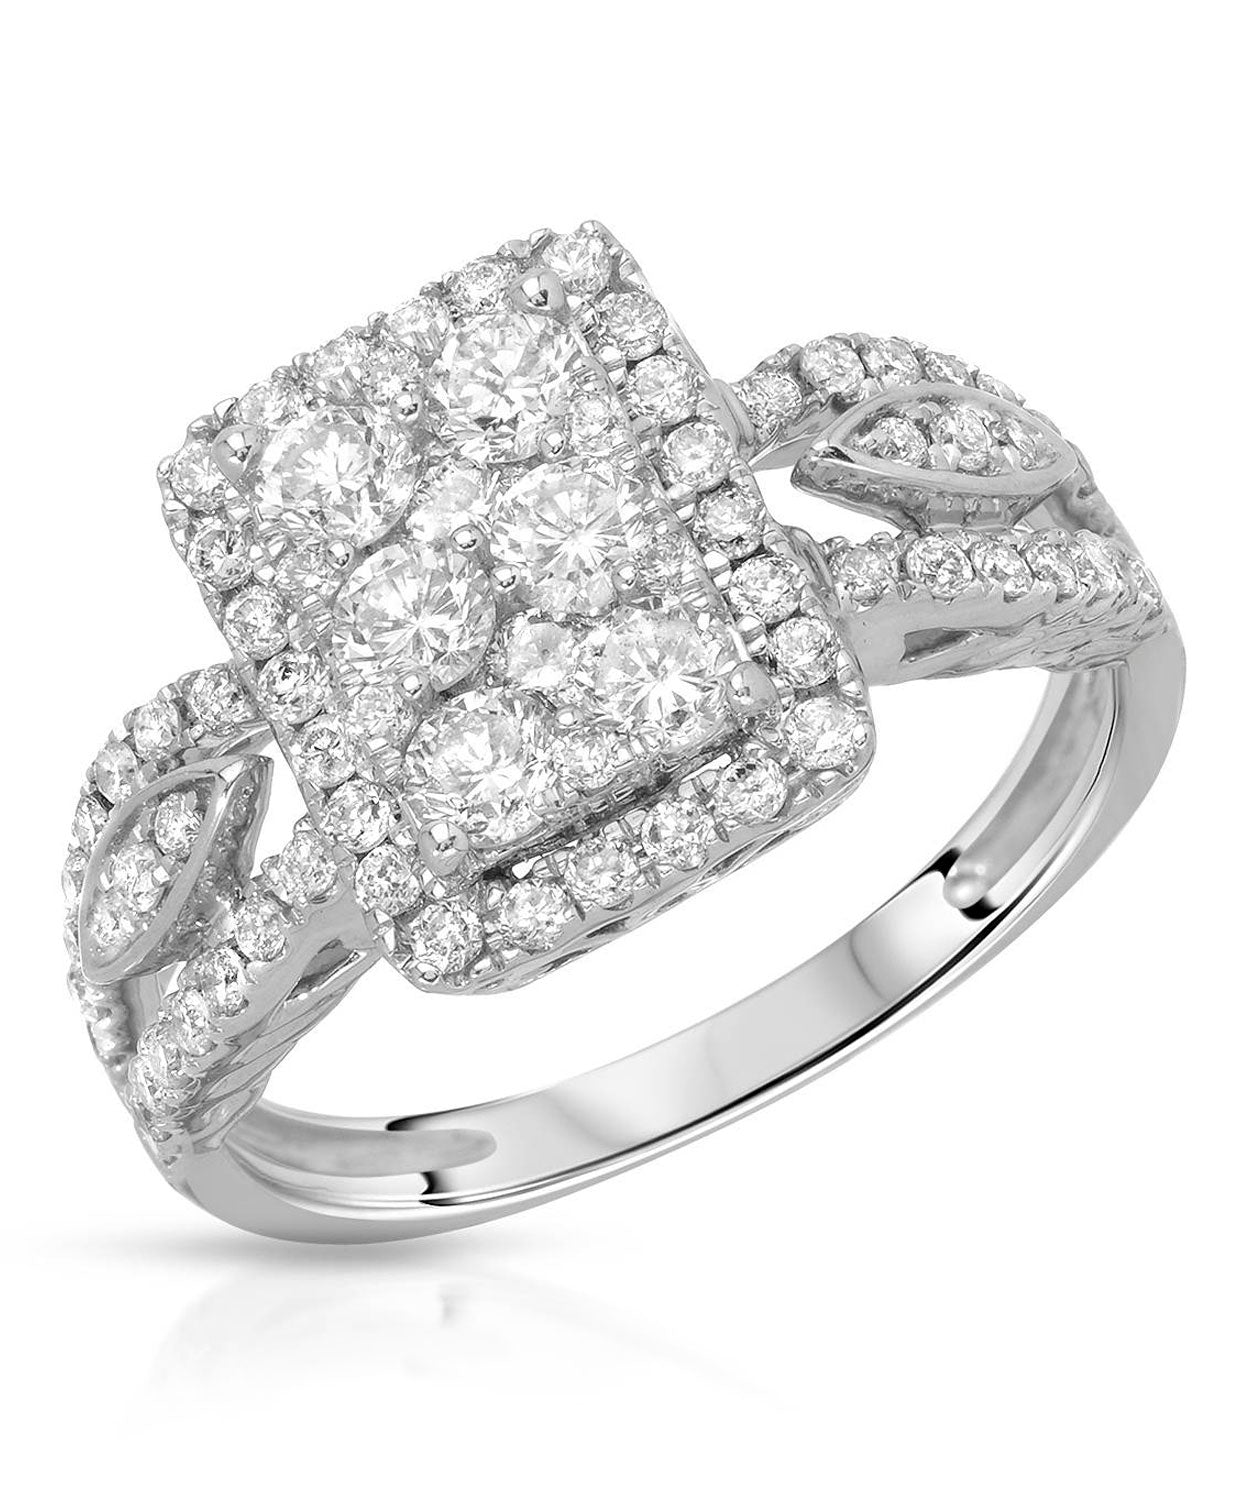 Signature Collection 1.03 ctw Diamond 14k White Gold Cluster Engagement Ring View 1